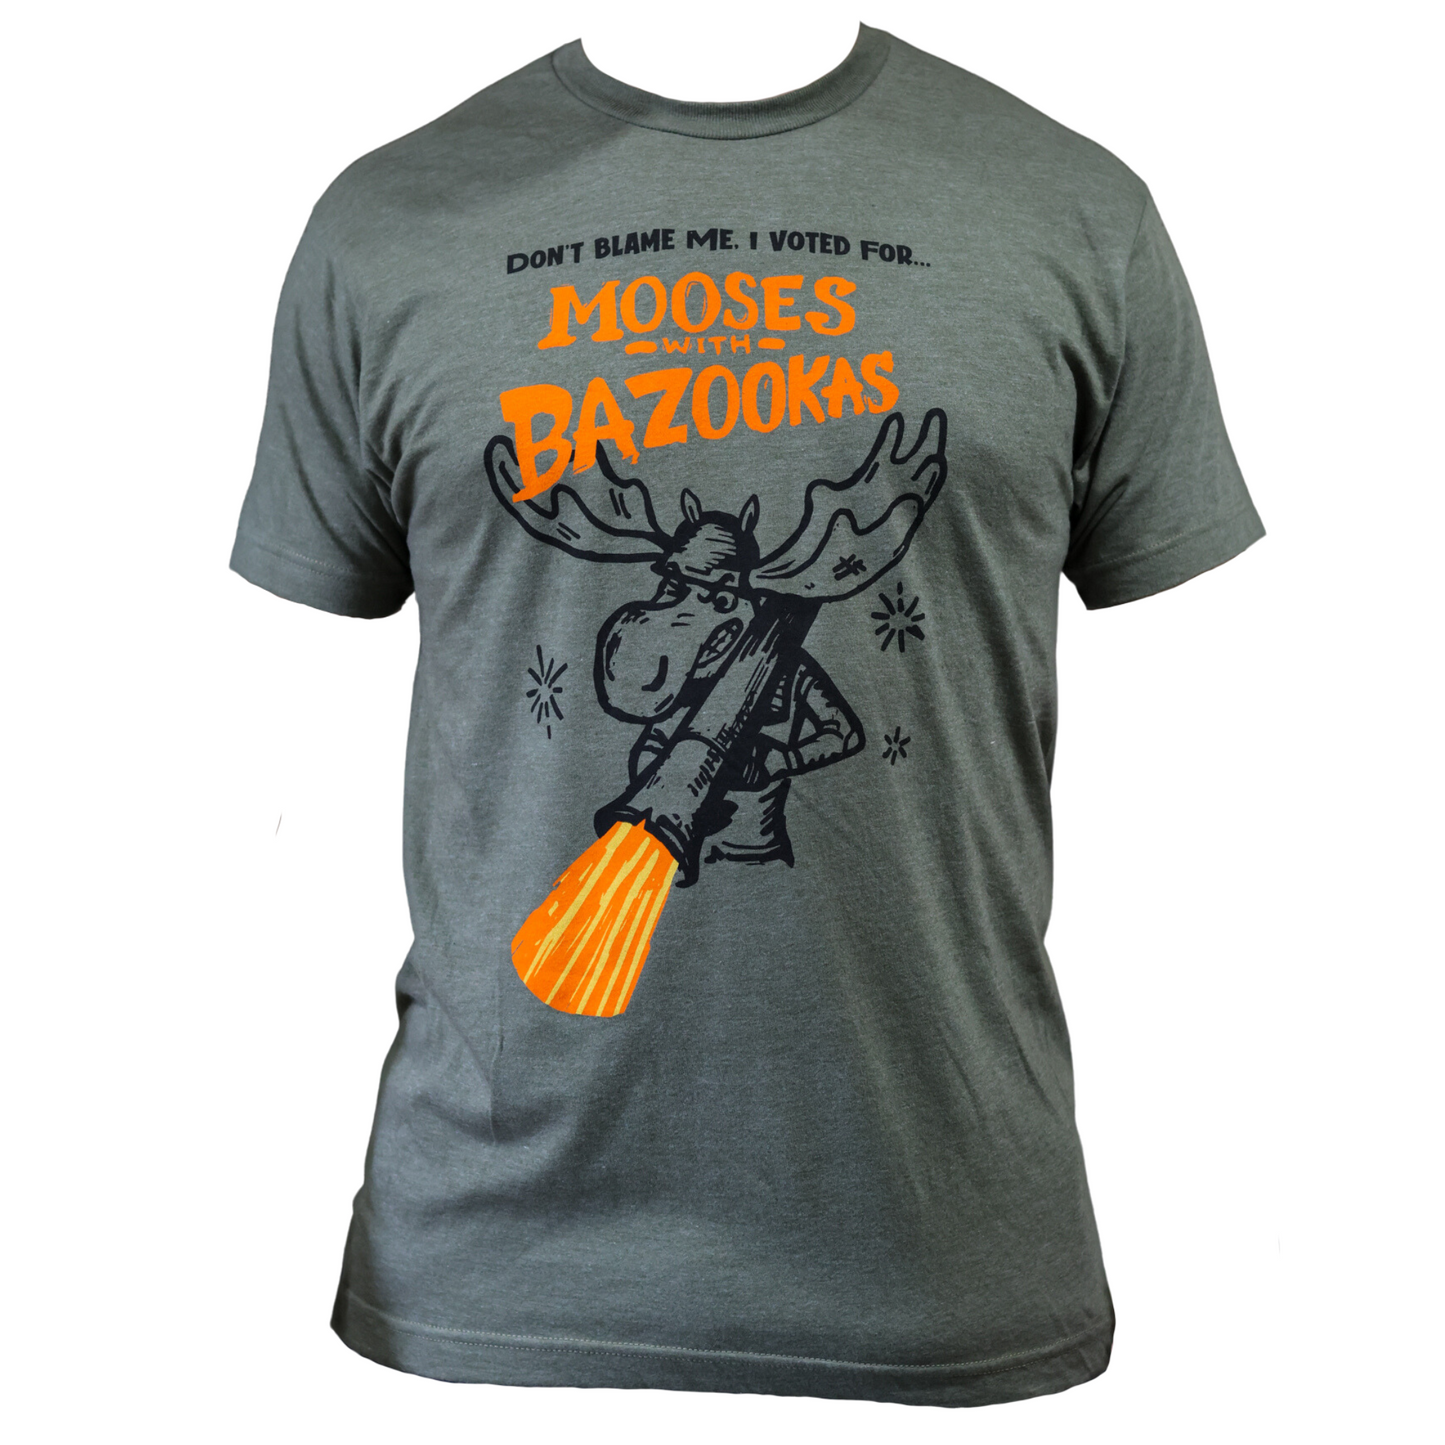 Mooses with Bazookas T-Shirt